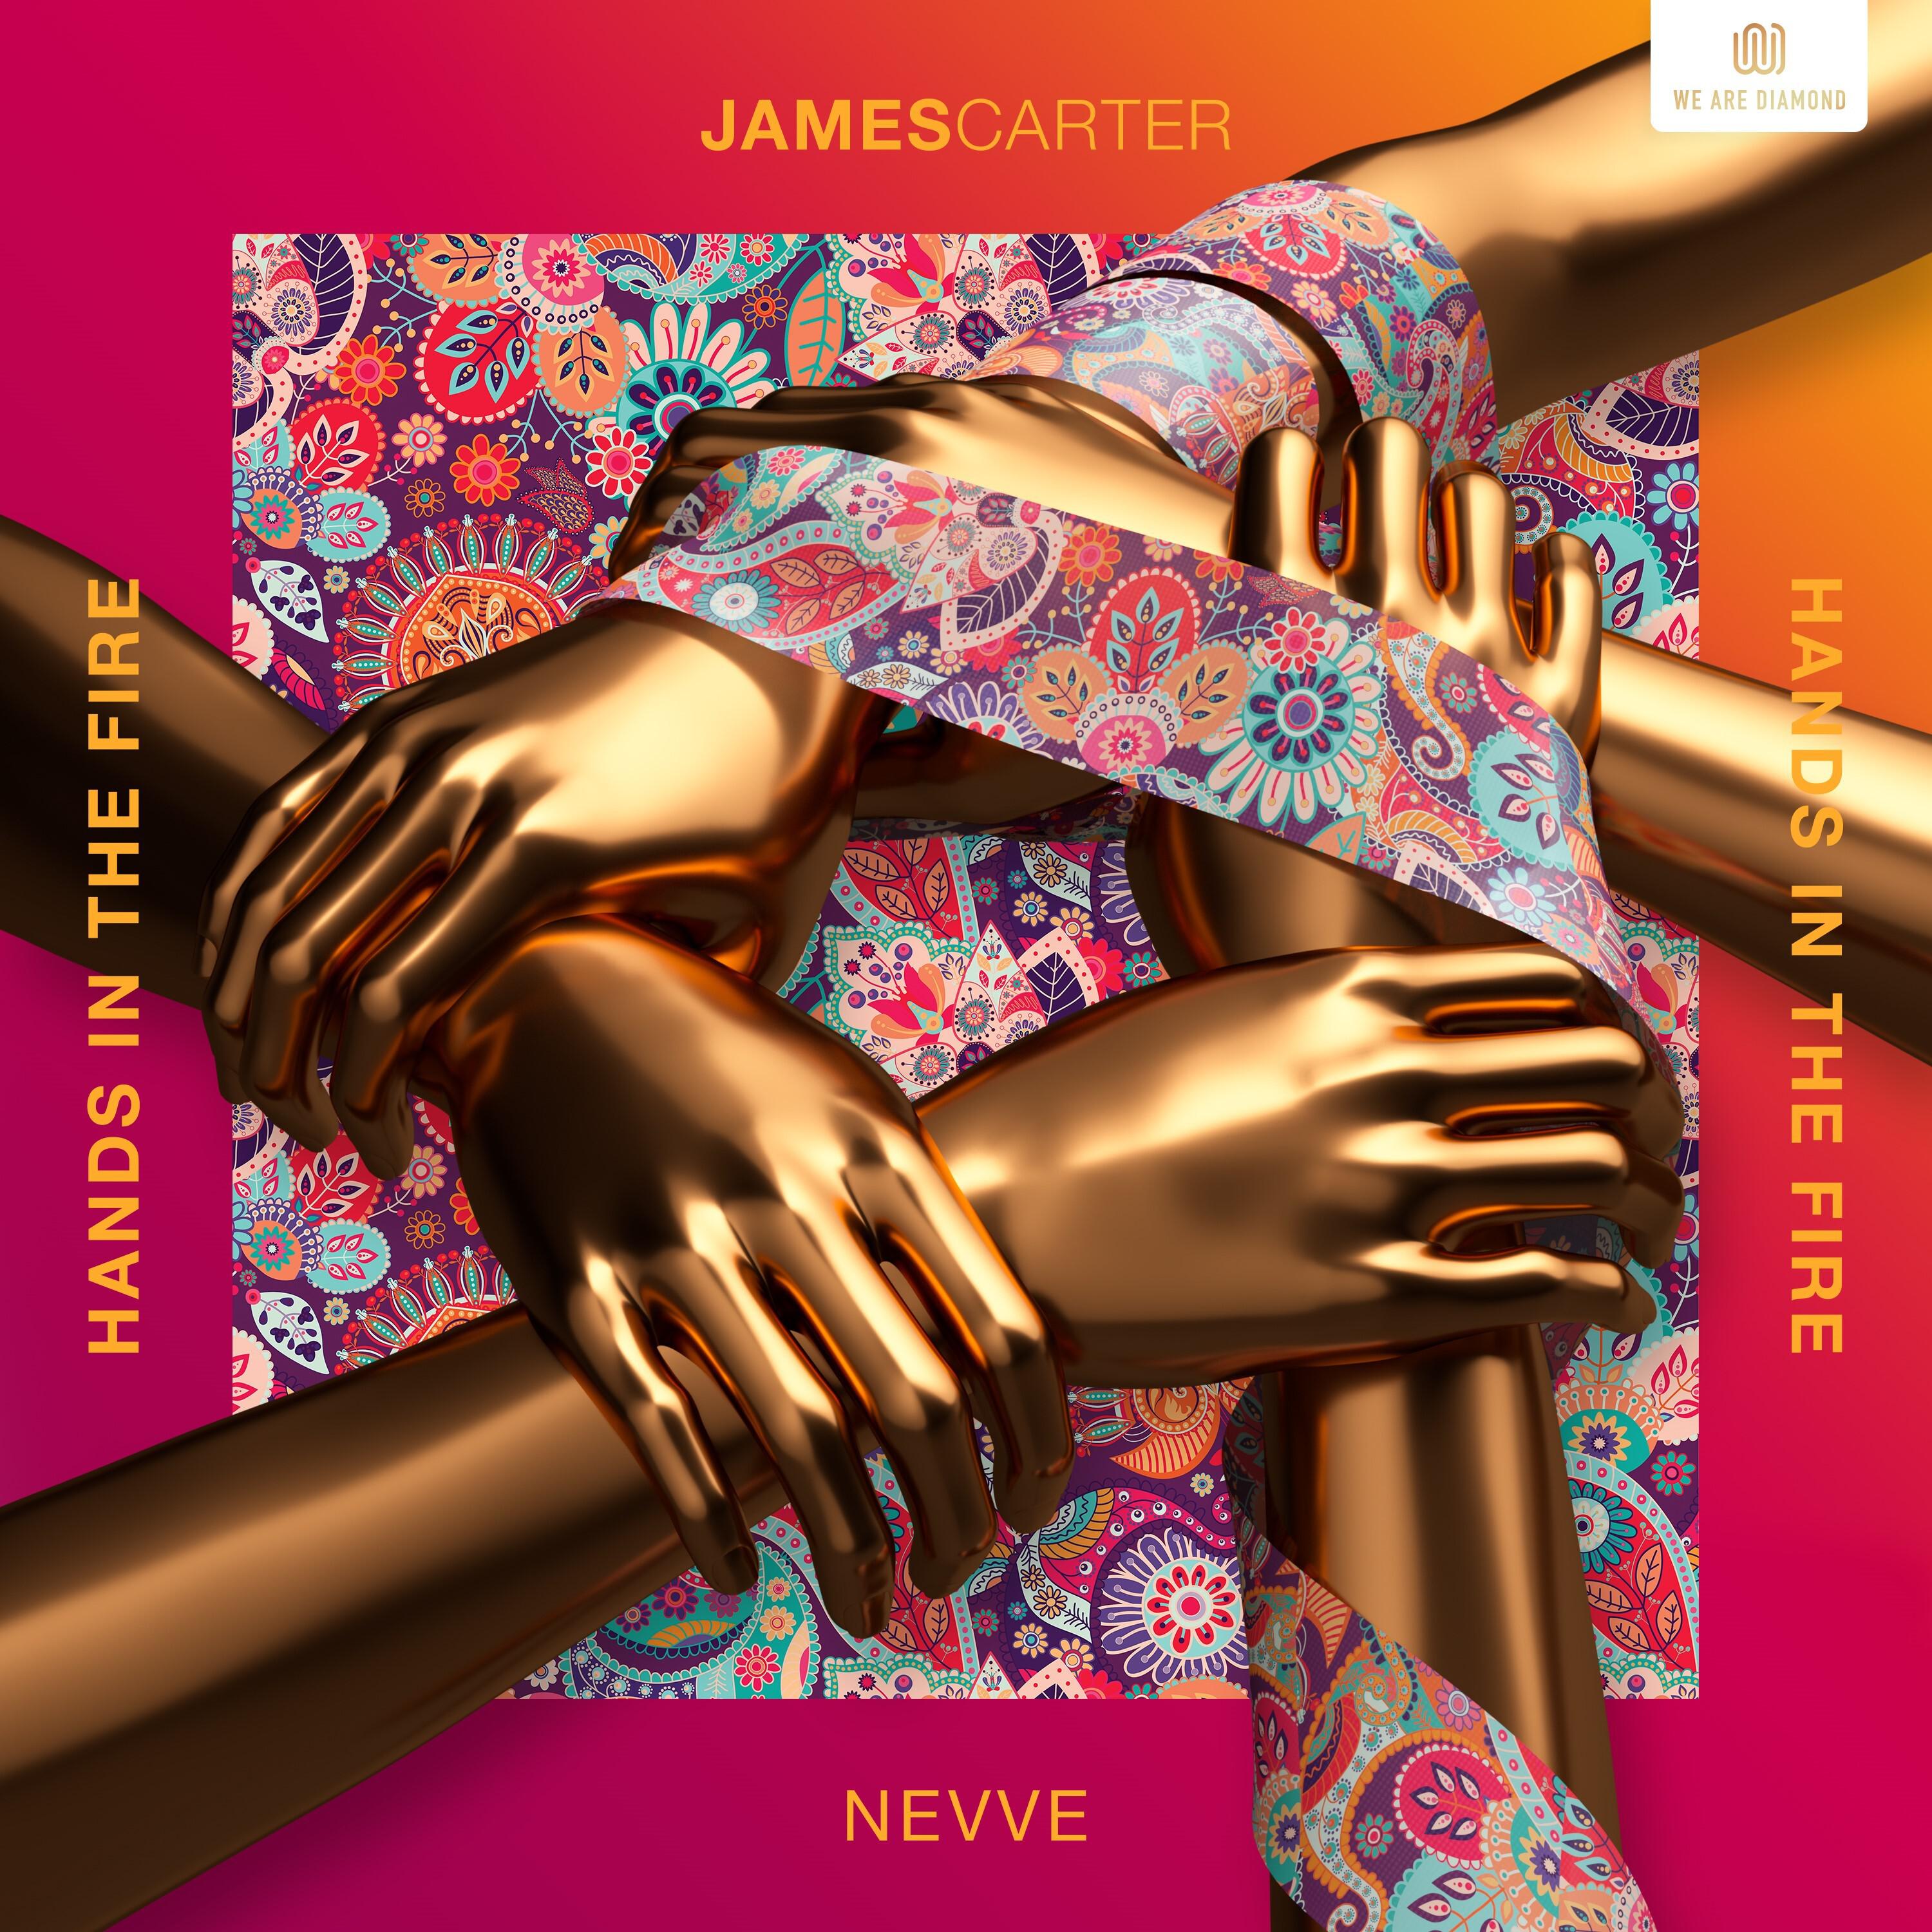 Hands in the Fire歌词 歌手James Carter / Nevve-专辑Hands in the Fire-单曲《Hands in the Fire》LRC歌词下载